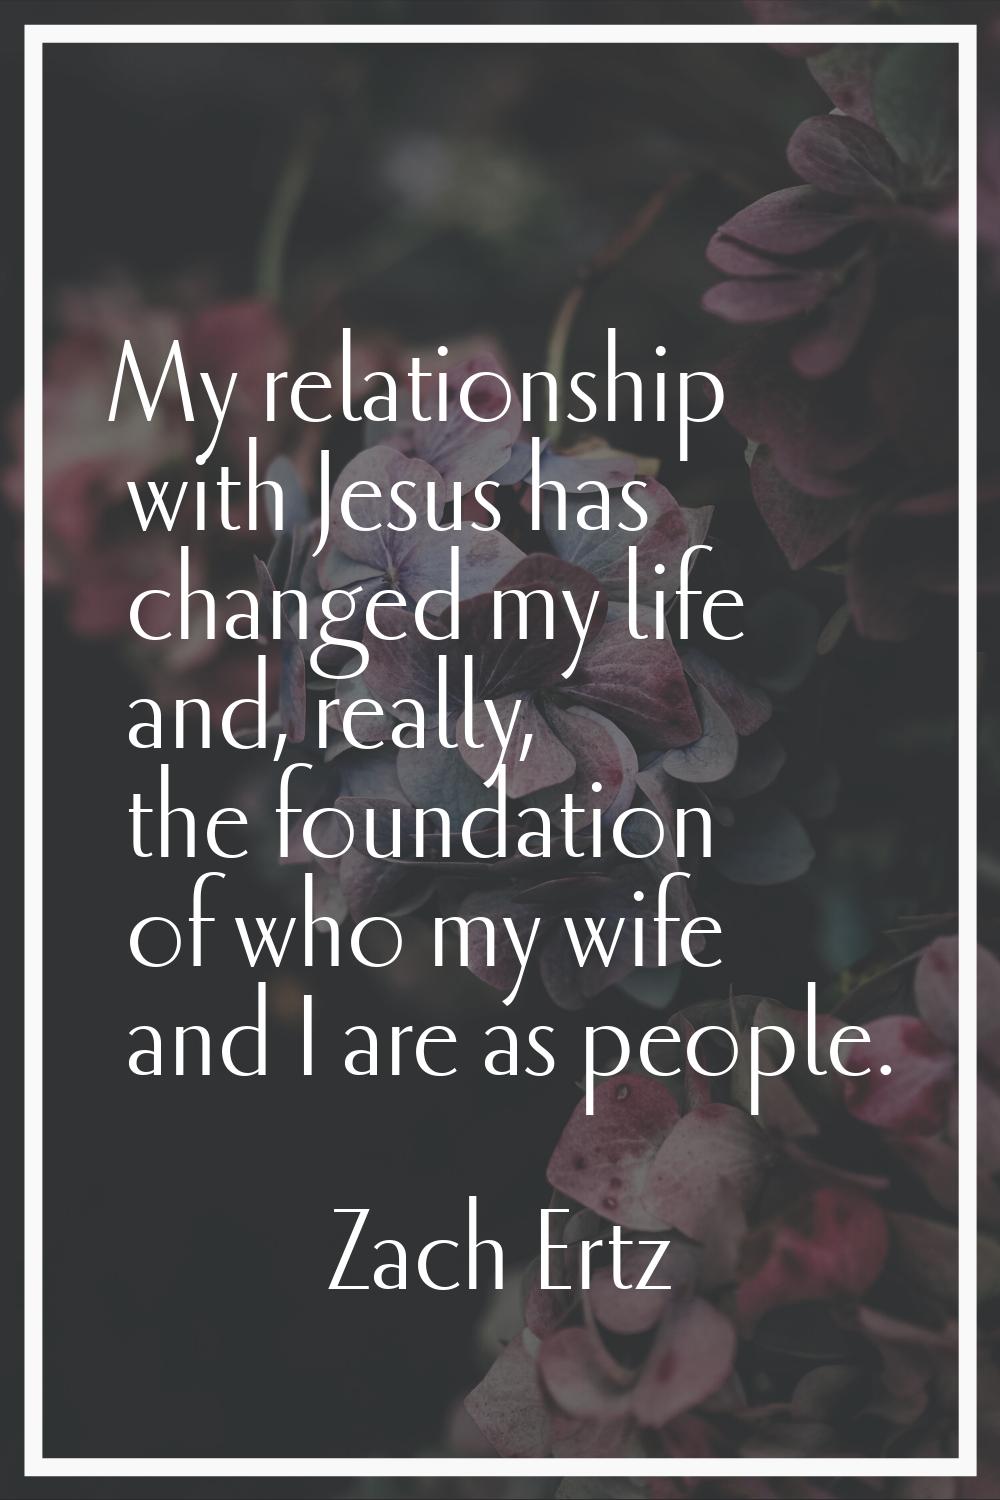 My relationship with Jesus has changed my life and, really, the foundation of who my wife and I are